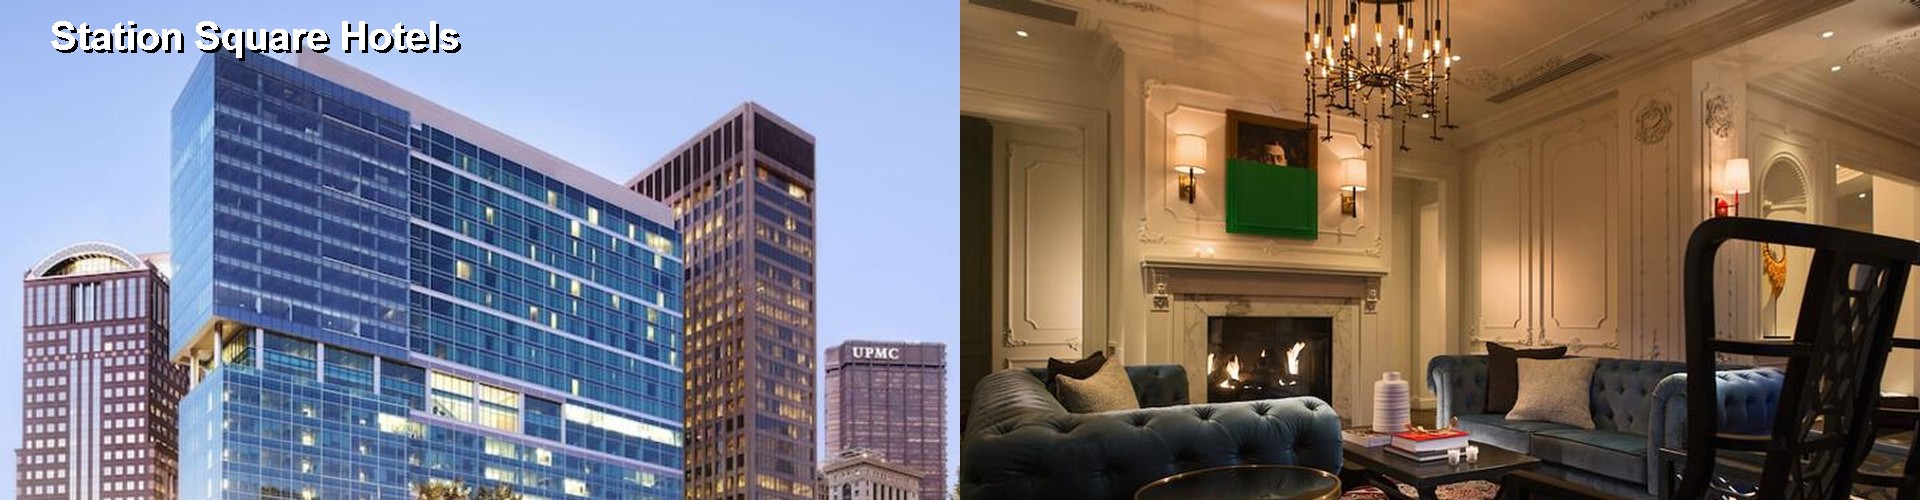 5 Best Hotels near Station Square